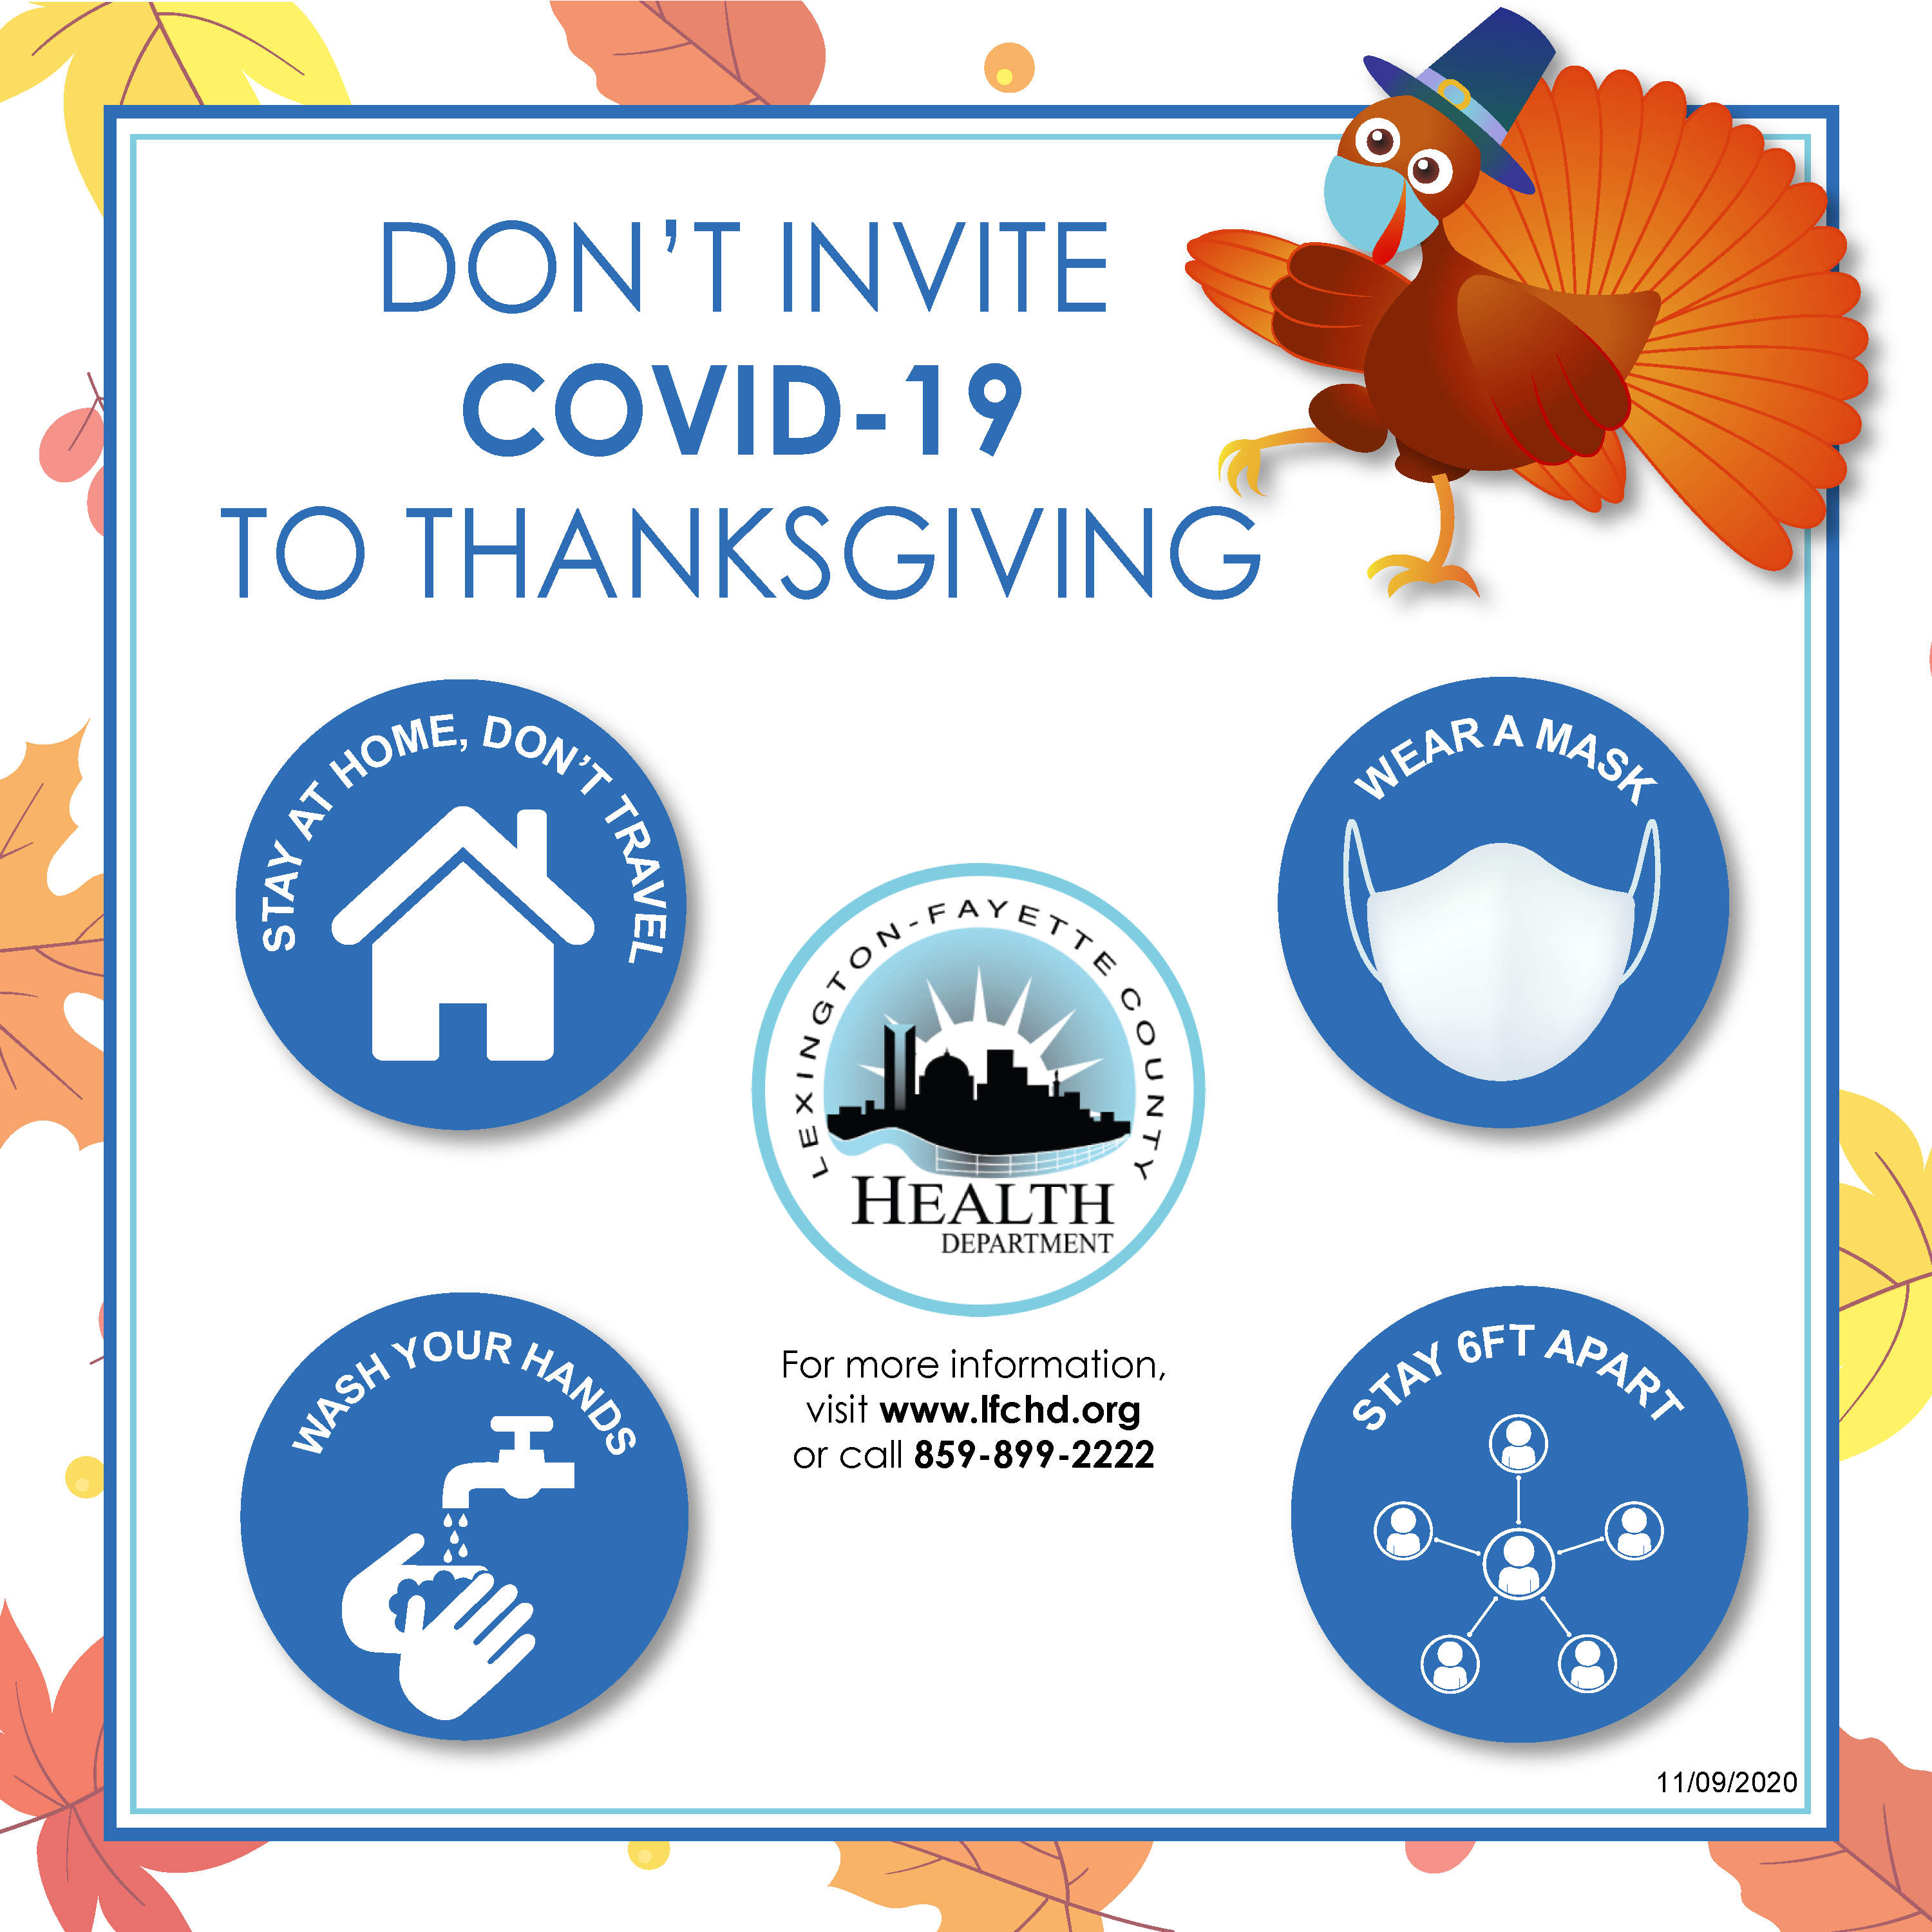 COVID-19 safety tips for Thanksgiving